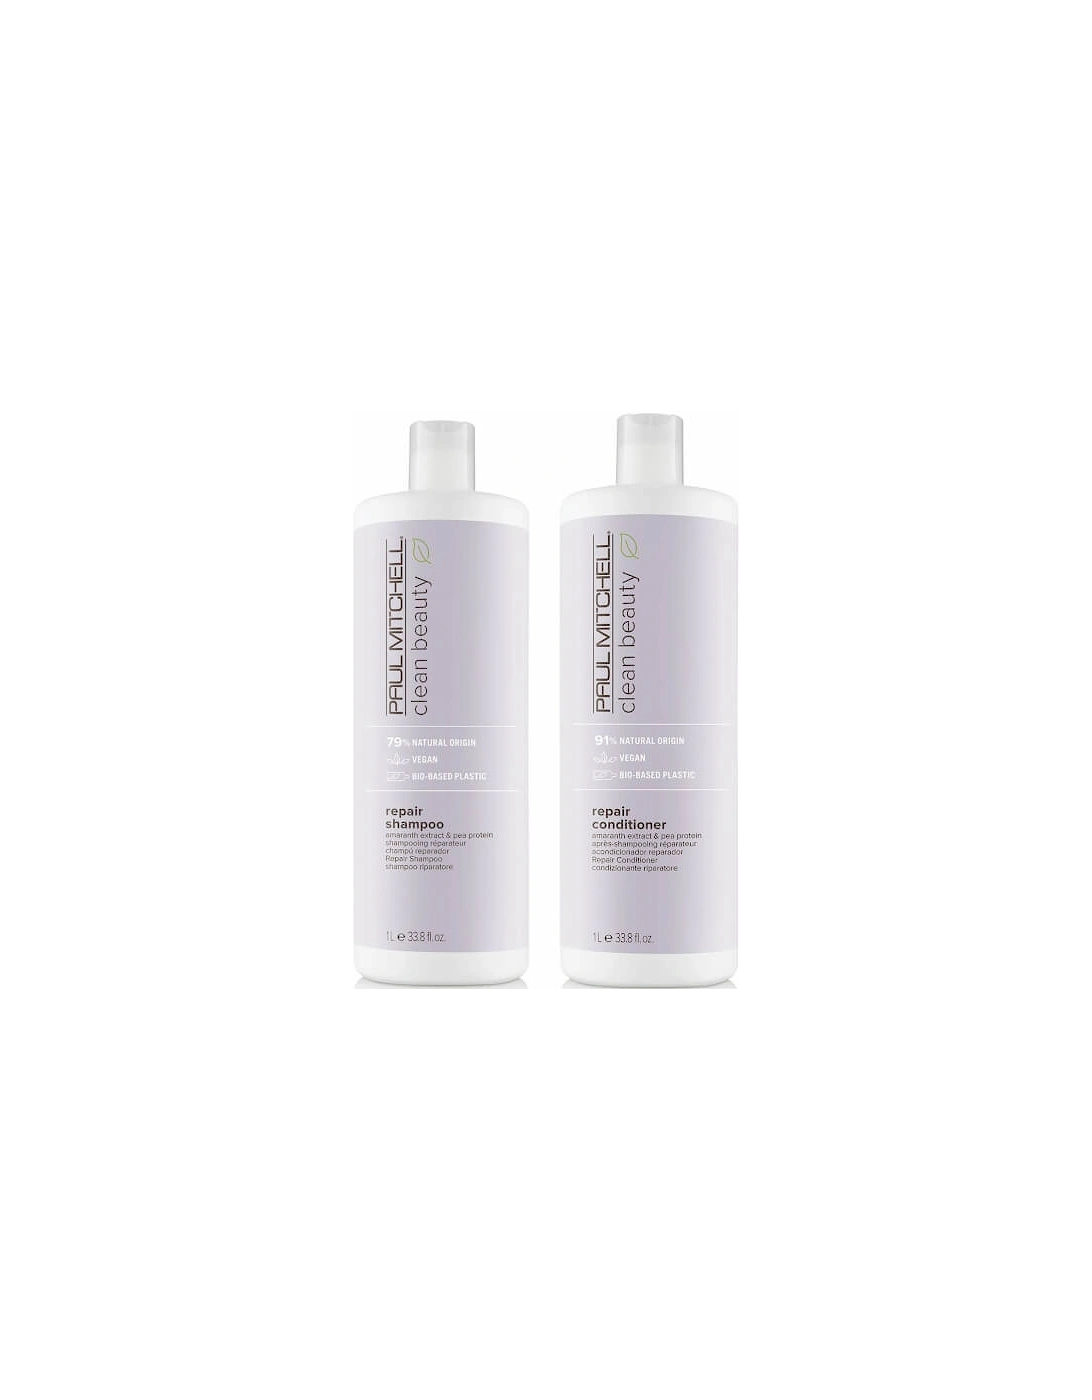 Clean Beauty Repair Shampoo and Conditioner Supersize Set, 2 of 1